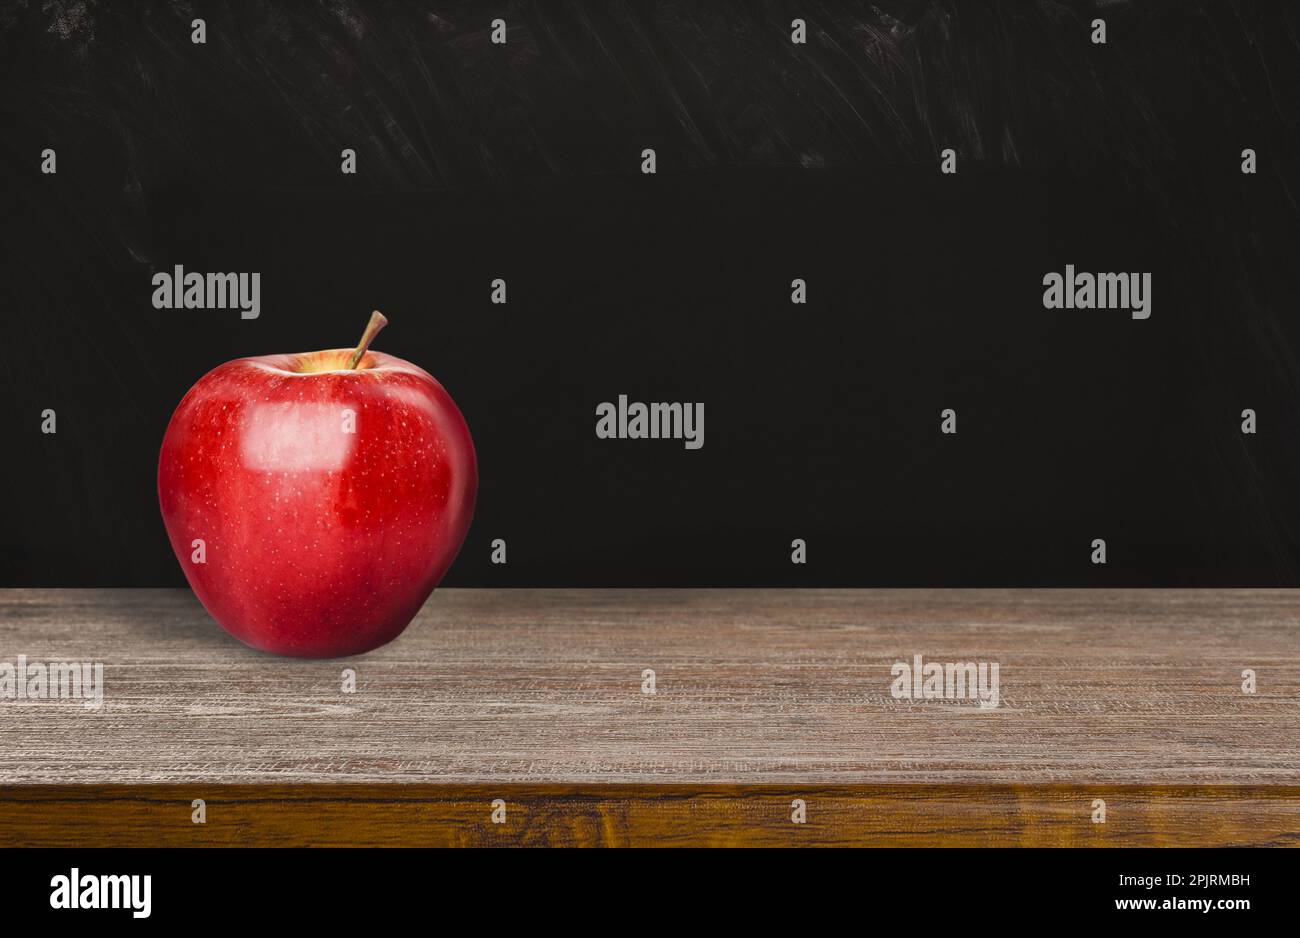 Fresh ripe red apple on wooden table near black chalkboard, space for text Stock Photo